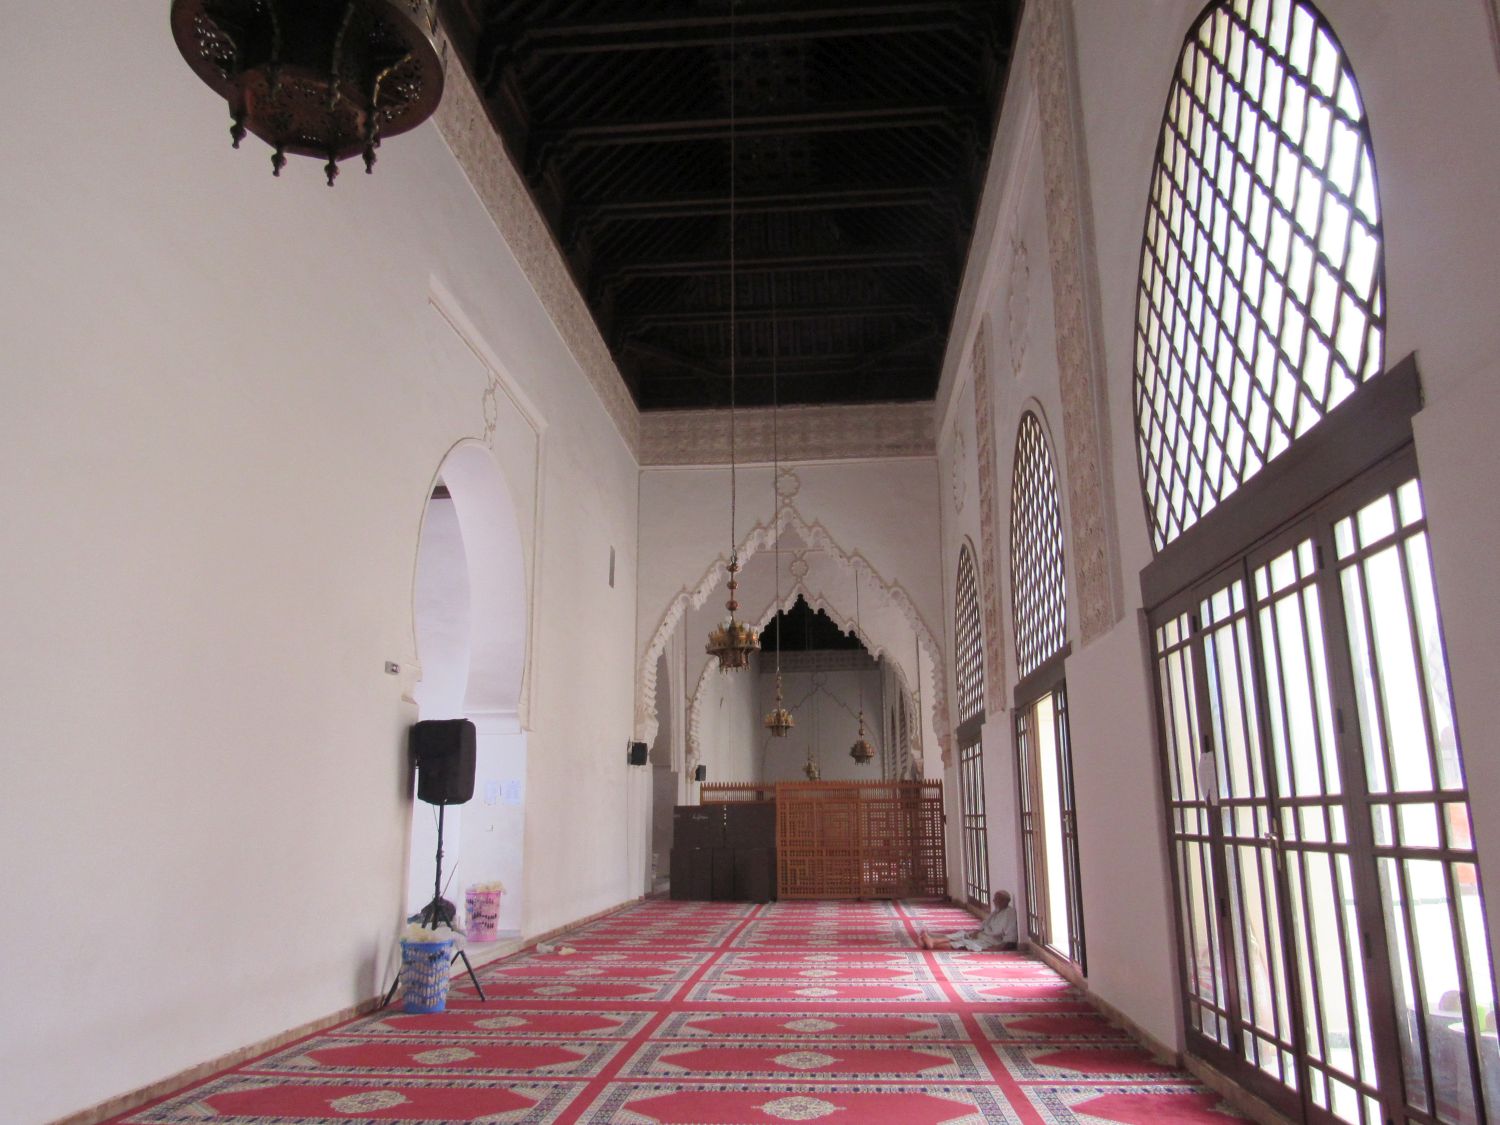 Interior view of the prayer hall with wood ceiling, and carved wood screens